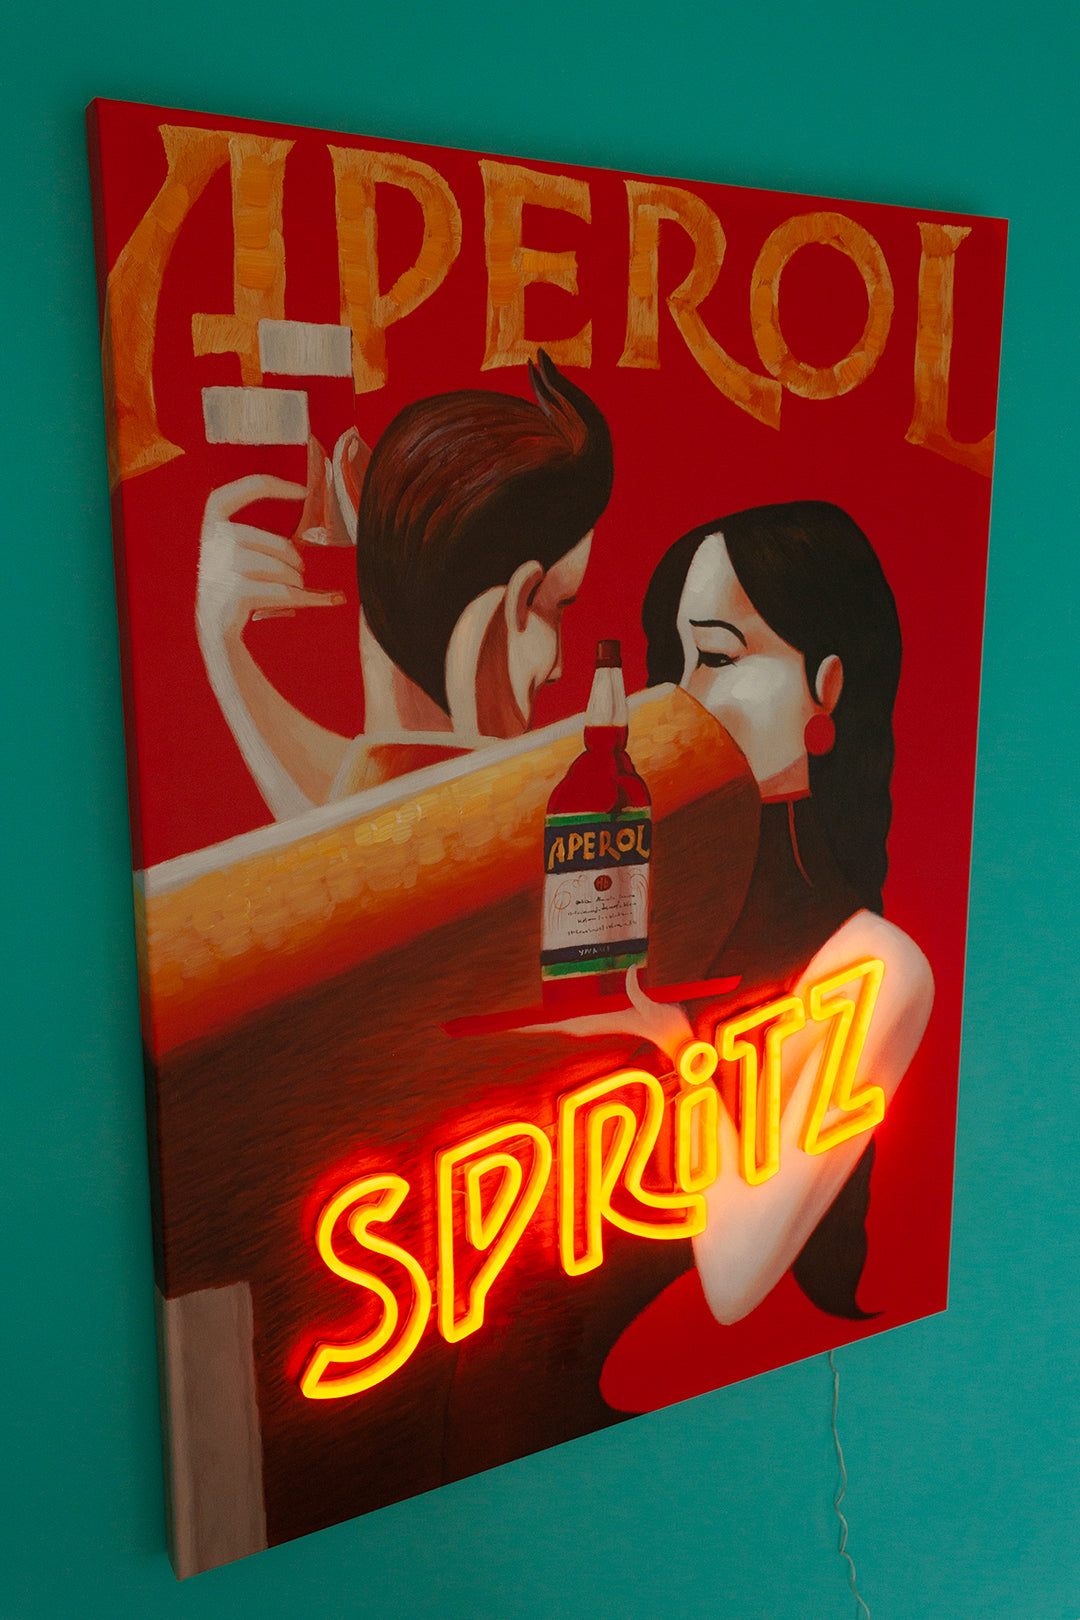 Wall Painting (LED Neon) - Spritz